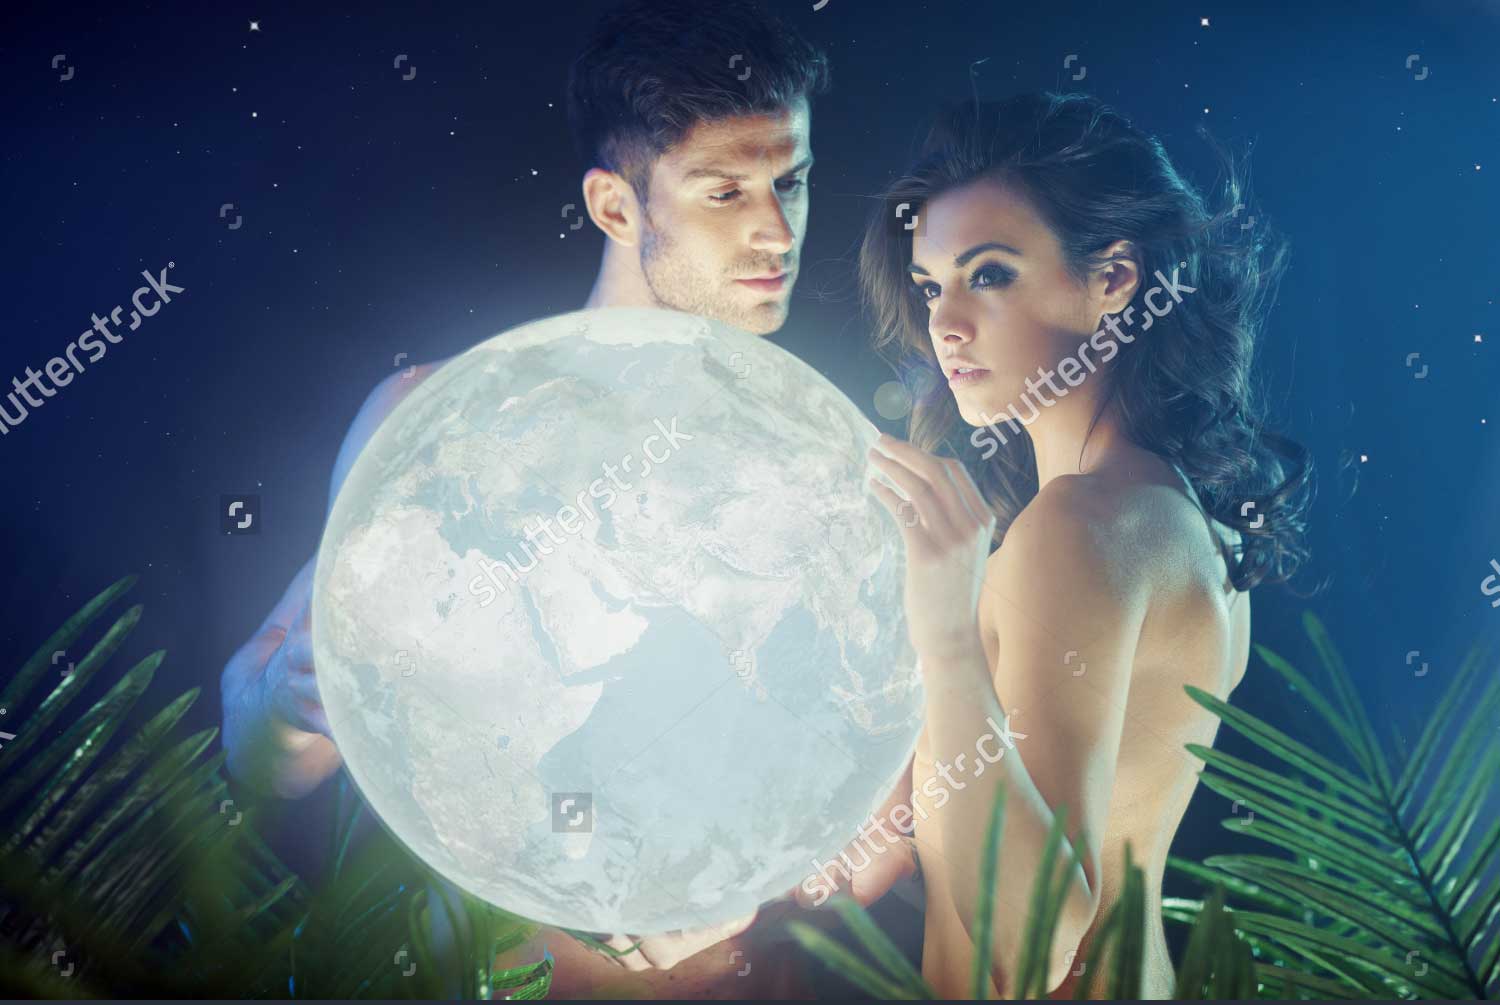 Romantic stock photo of couple in the jungle with a moon from Shutterstock for Sugar Moon spoof Jennifer Hallock steamy historical